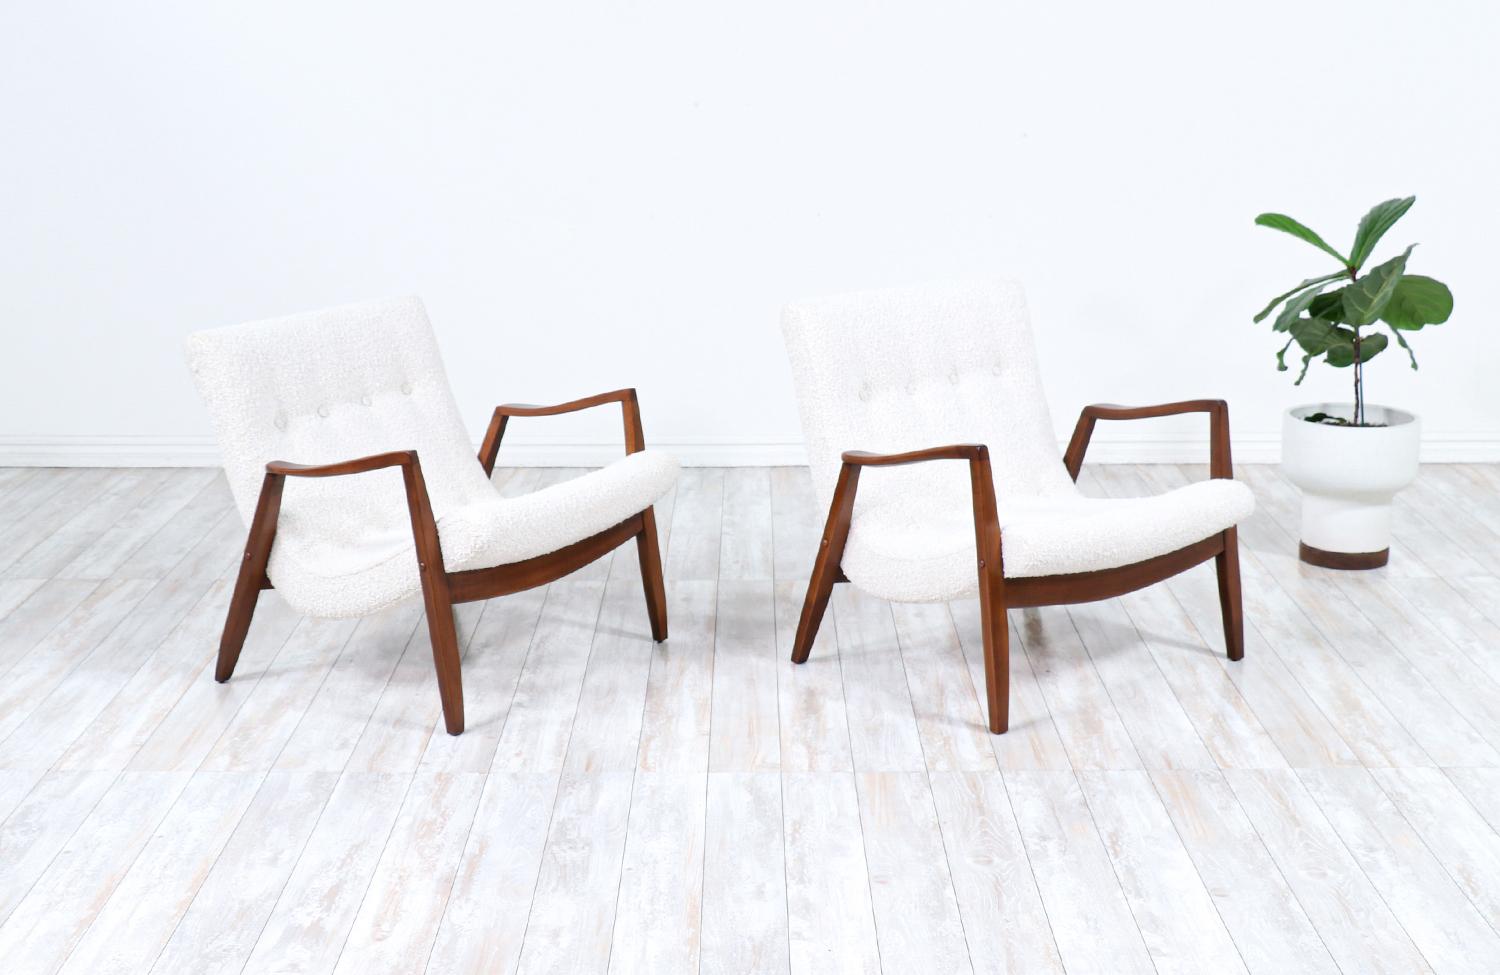 Pair of stylish ‘Scoop’ Lounge chair designed by Milo Baughman in the United States for James Inc. circa 1950s. These rare lounge chairs features an angled sculpted walnut wood frame with wide wood stretchers that hold the ‘scooped’ seat that